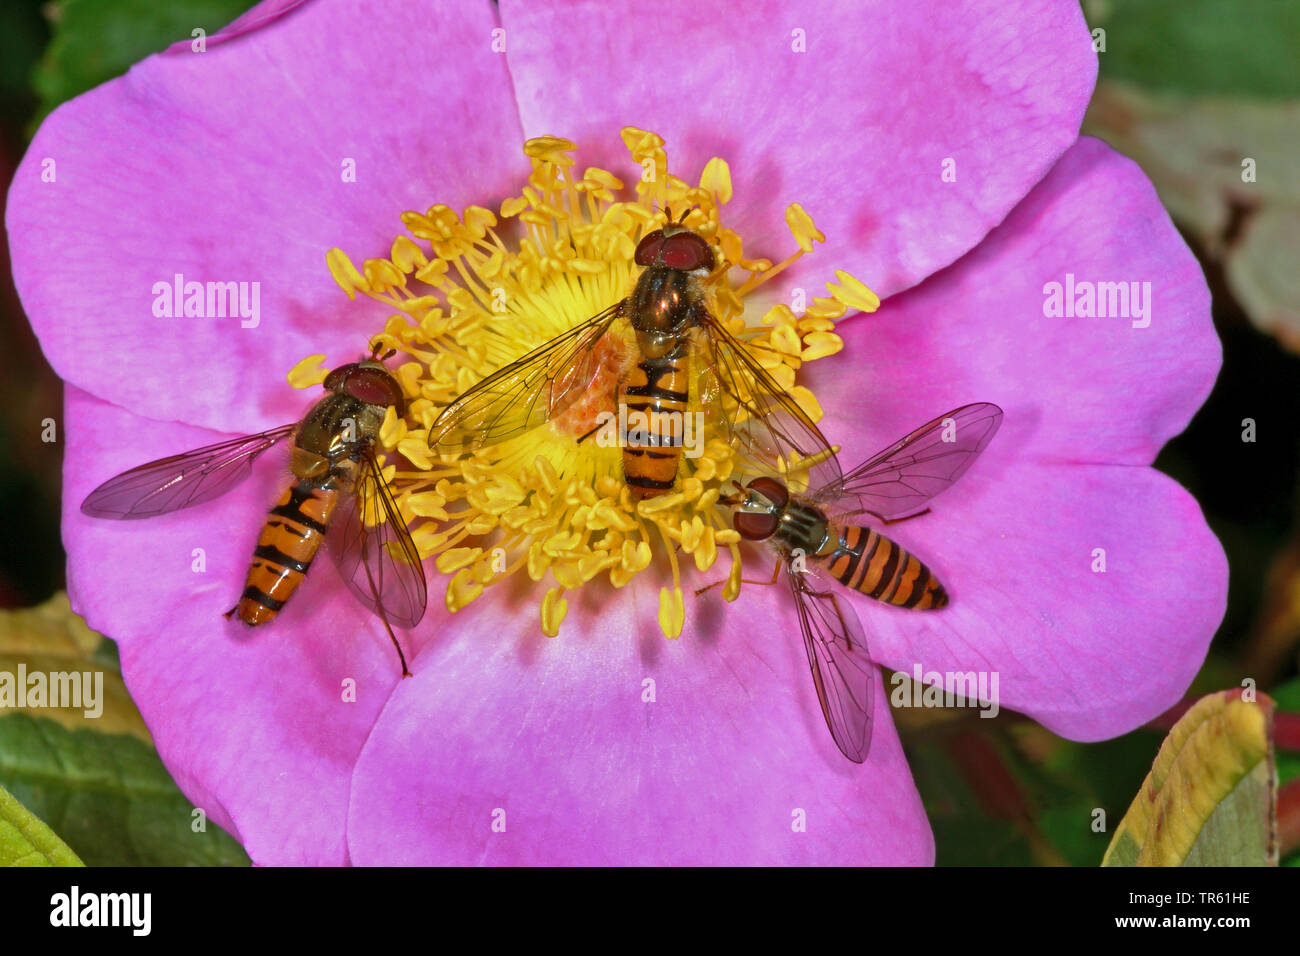 Marmalade hoverfly (Episyrphus balteatus), three Marmalade hoverflies on a blossom, view from above, Germany Stock Photo